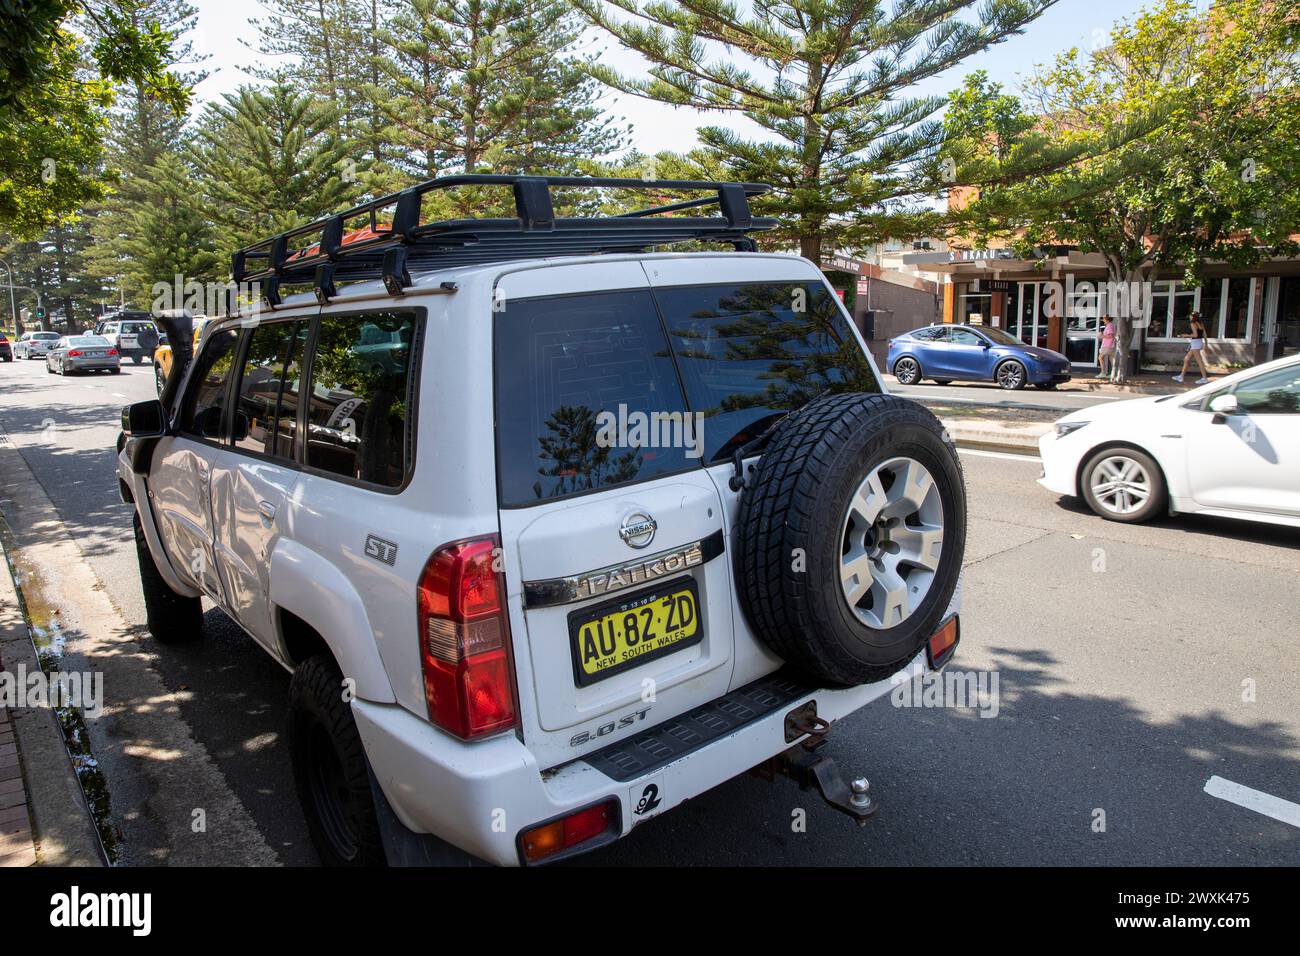 2004 white Nissan Patrol, four wheel drive vehicle popular with off road and overloading drivers, parked in Sydney,Australia Stock Photo